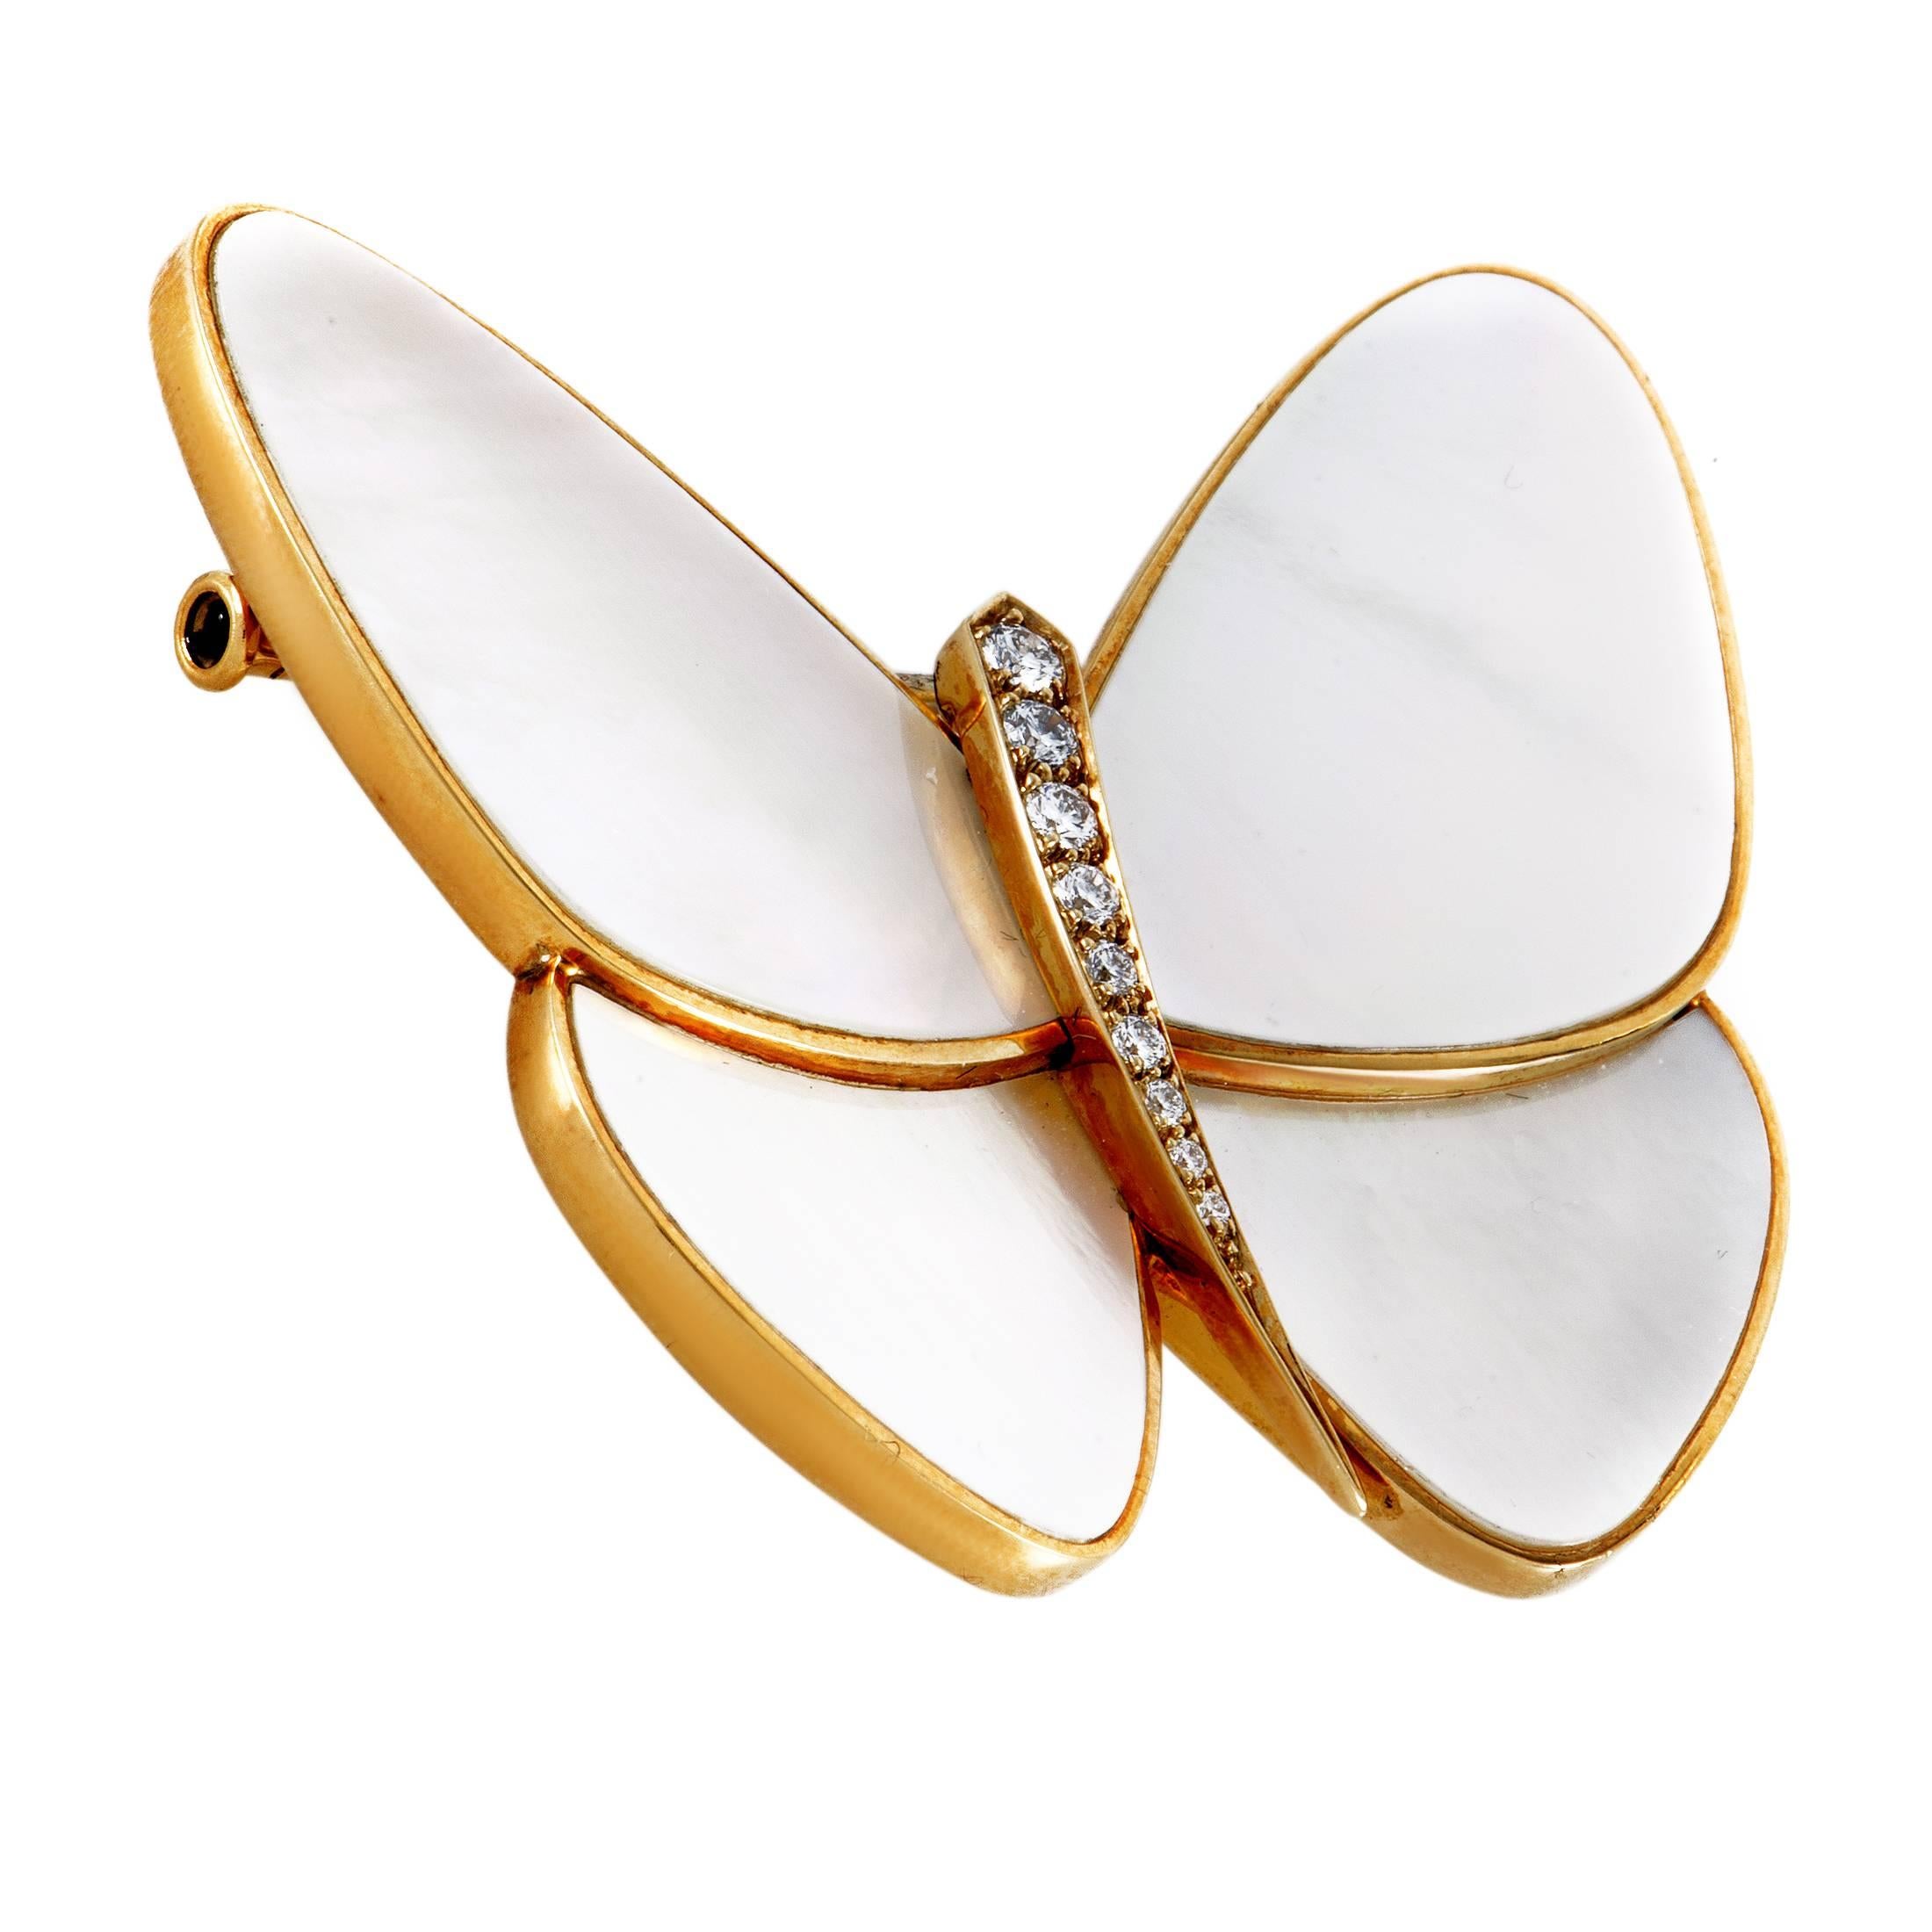 Designed in the brand's authentic style and crafted with exquisite expertise, this spellbinding brooch form Van Cleef & Arpels boasts the marvelous form of a butterfly presented in a tasteful blend of 18K yellow gold, glittering diamonds and subtle